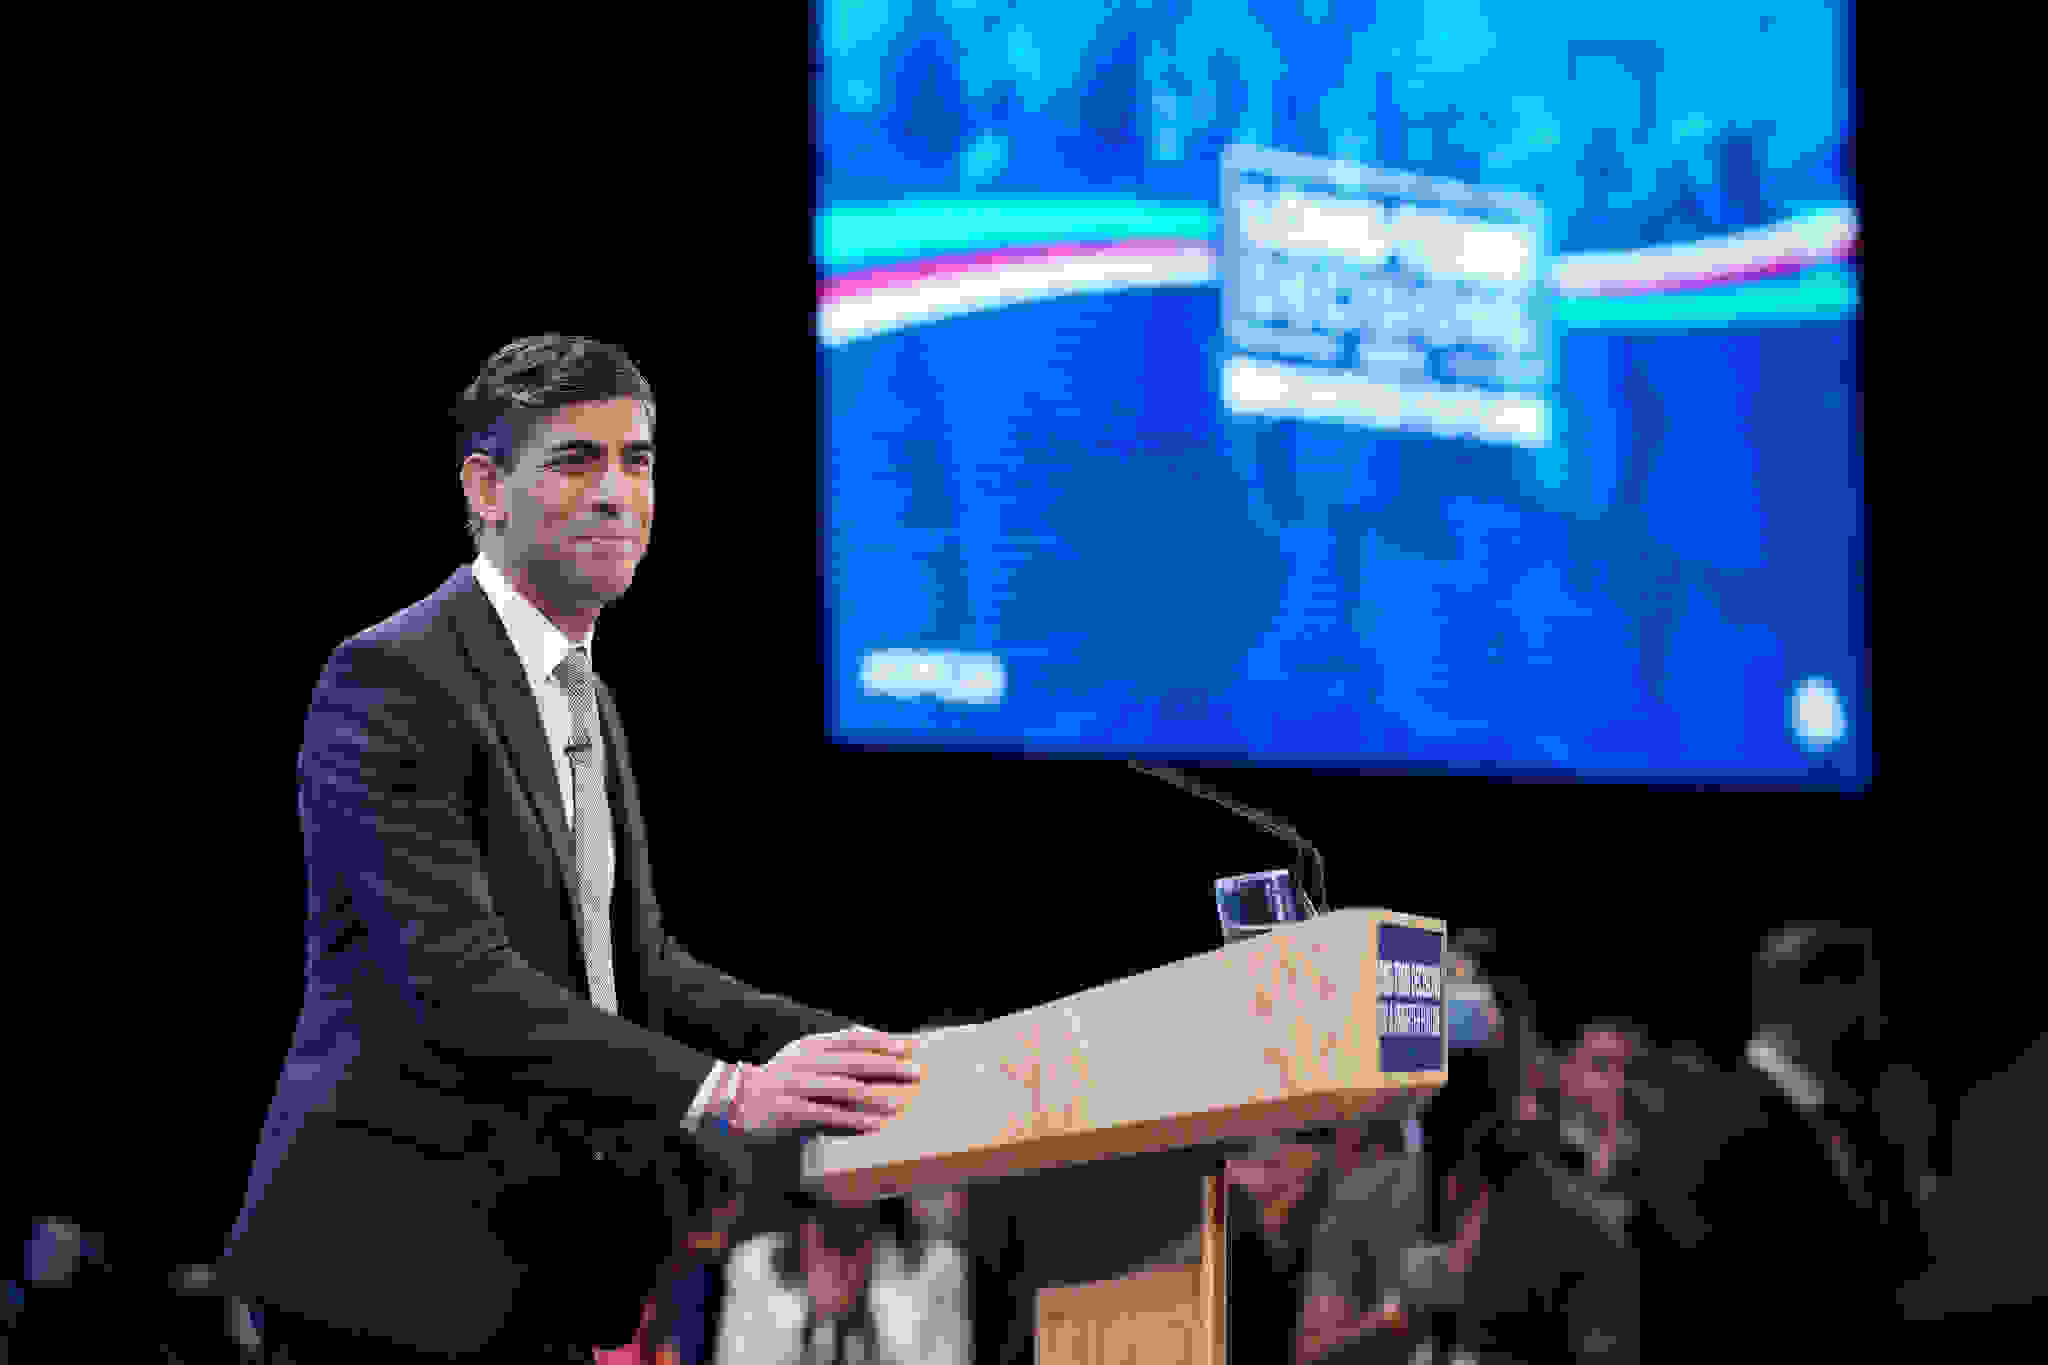 Prime Minister Rishi Sunak MP announces the cancellation of the Birmingham to Manchester leg of HS2 during his speech to the Conservative Party Conference in Manchester, 4 October 2023. ©The Conservative Party (Dominic Lipinski CCHQ / Parsons Media and licensed under CC by 2.0 Deed)